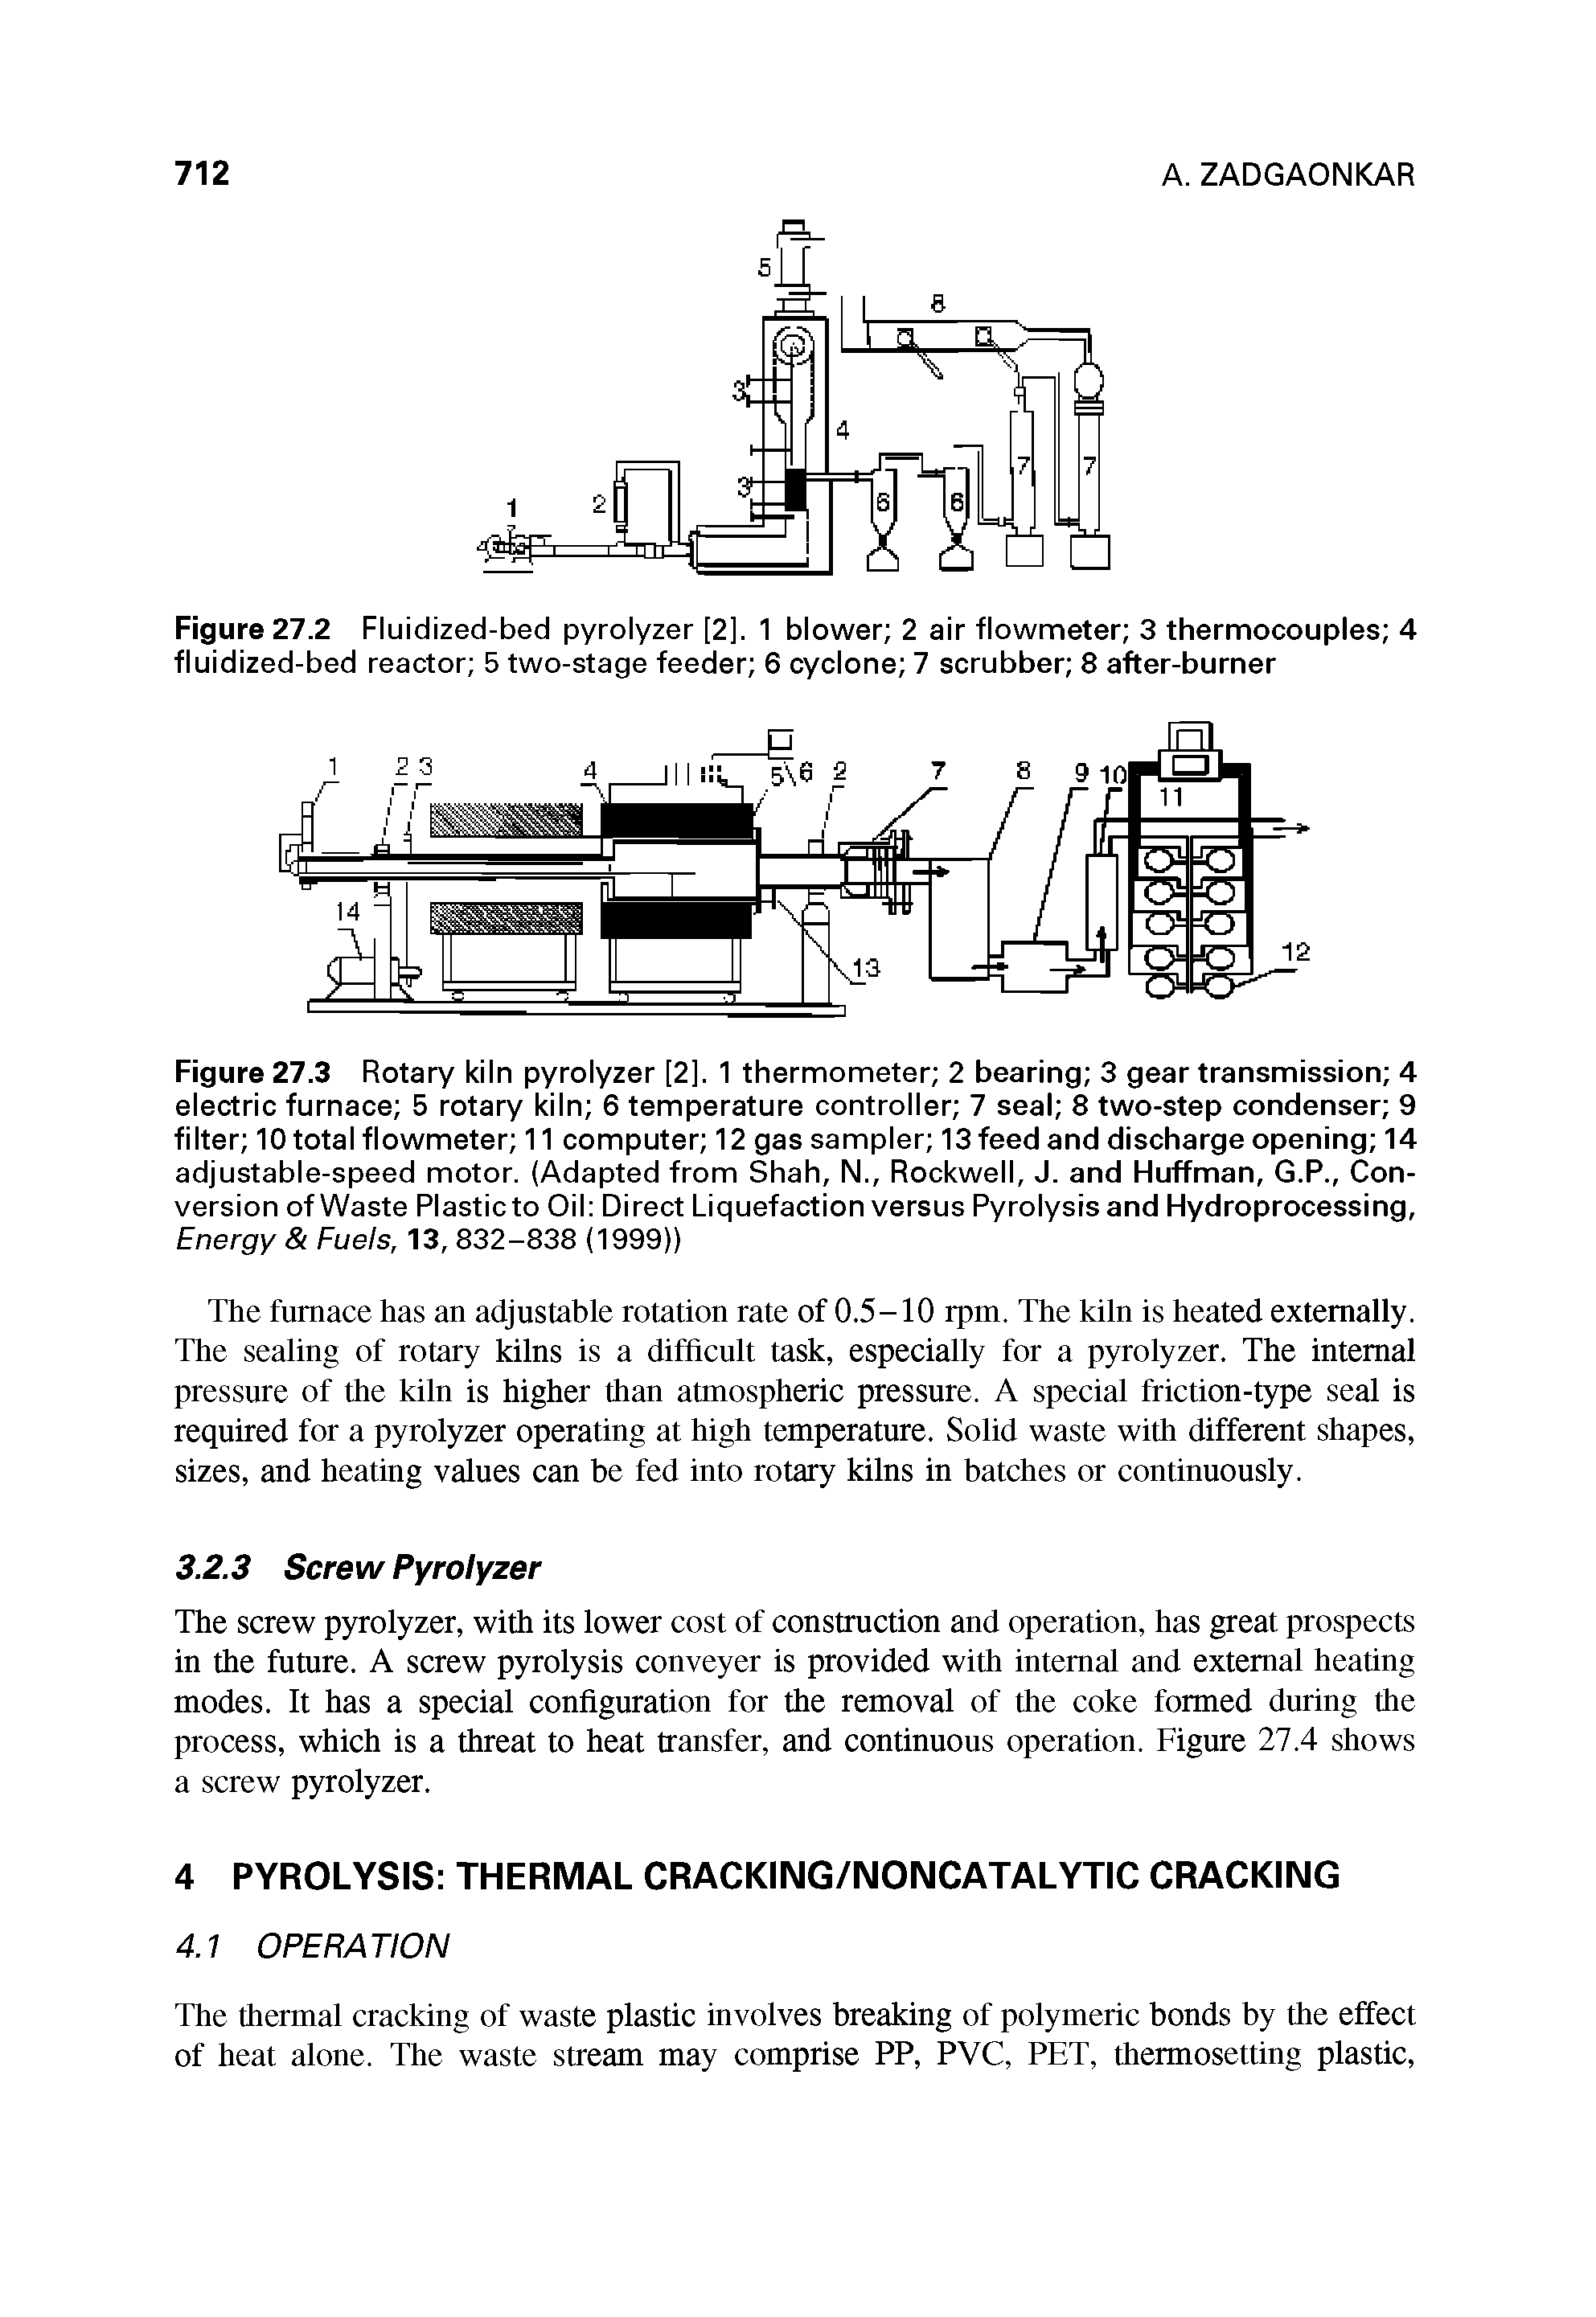 Figure 27.3 Rotary kiln pyrolyzer [2], 1 thermometer 2 bearing 3 gear transmission 4 electric furnace 5 rotary kiln 6 temperature controller 7 seal 8 two-step condenser 9 filter 10 total flowmeter 11 computer 12 gas sampler 13 feed and discharge opening 14 adjustable-speed motor. (Adapted from Shah, N., Rockwell, J. and Huffman, G.P., Conversion of Waste Plasticto Oil Direct Liquefaction versus Pyrolysis and Hydroprocessing, Energy Fuels, 13, 832-838 (1999))...